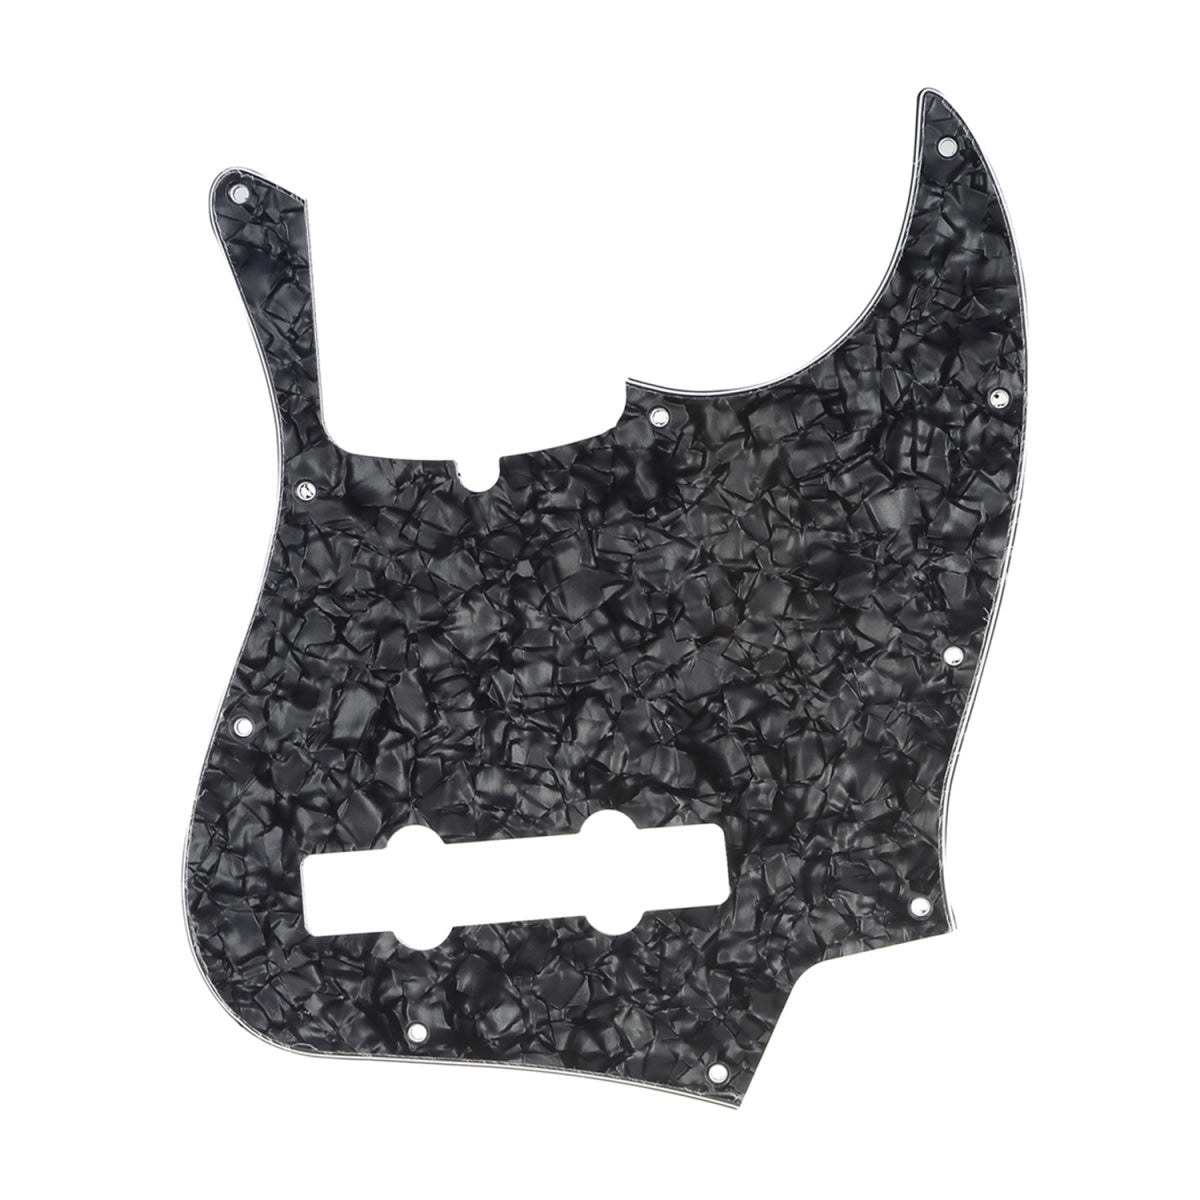 Musiclily Pro 10-Hole Contemporary J Bass Pickguard for Fender Jazz Bass American 5-String, 4Ply Black Pearl